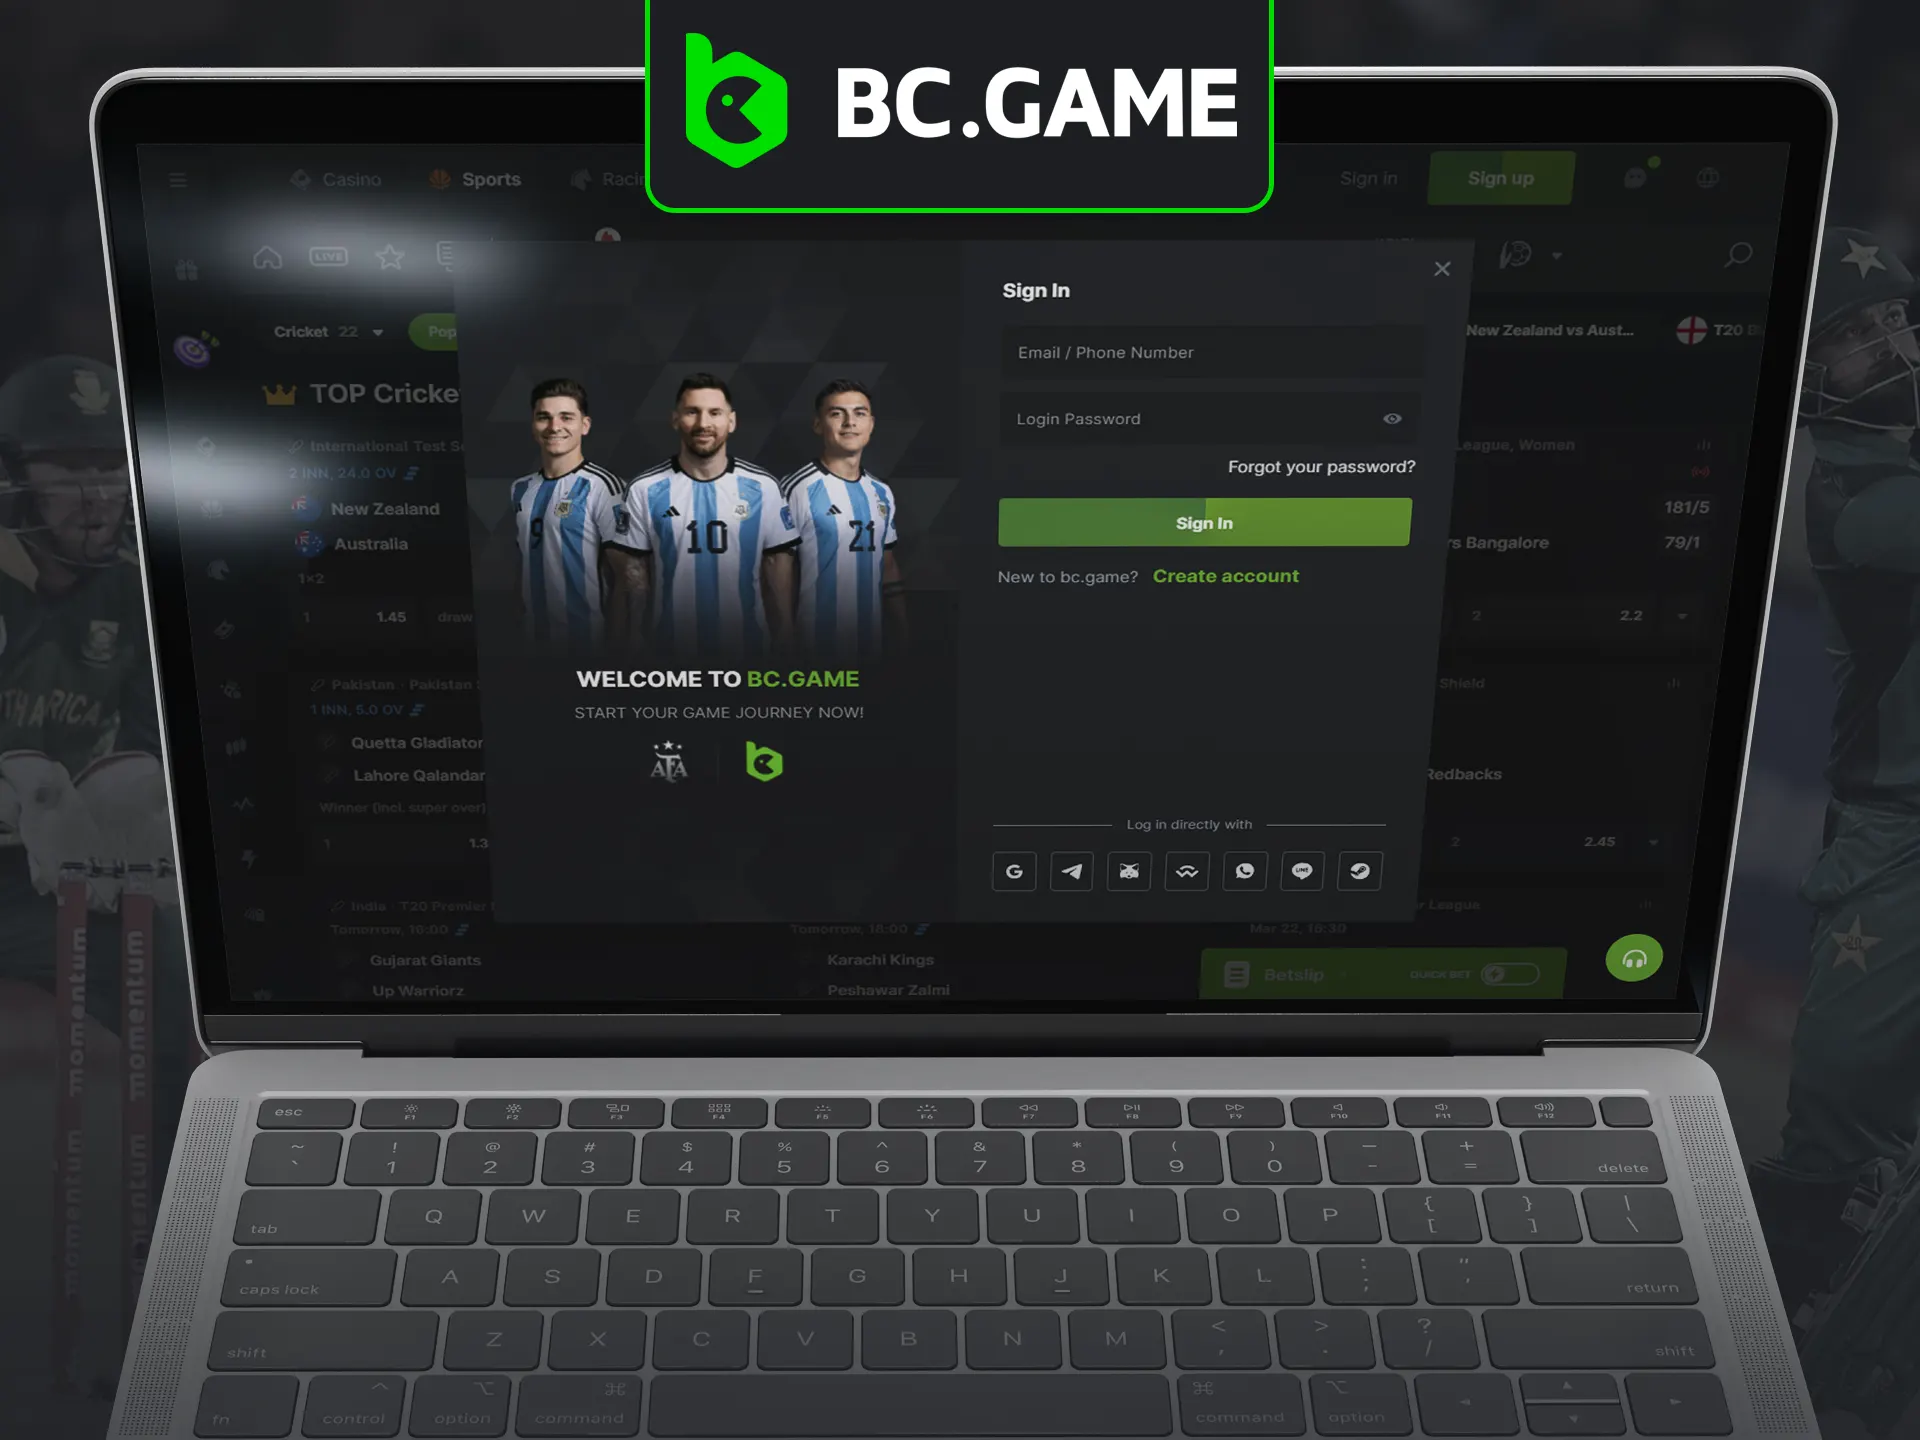 Log in to BC Game account easily.